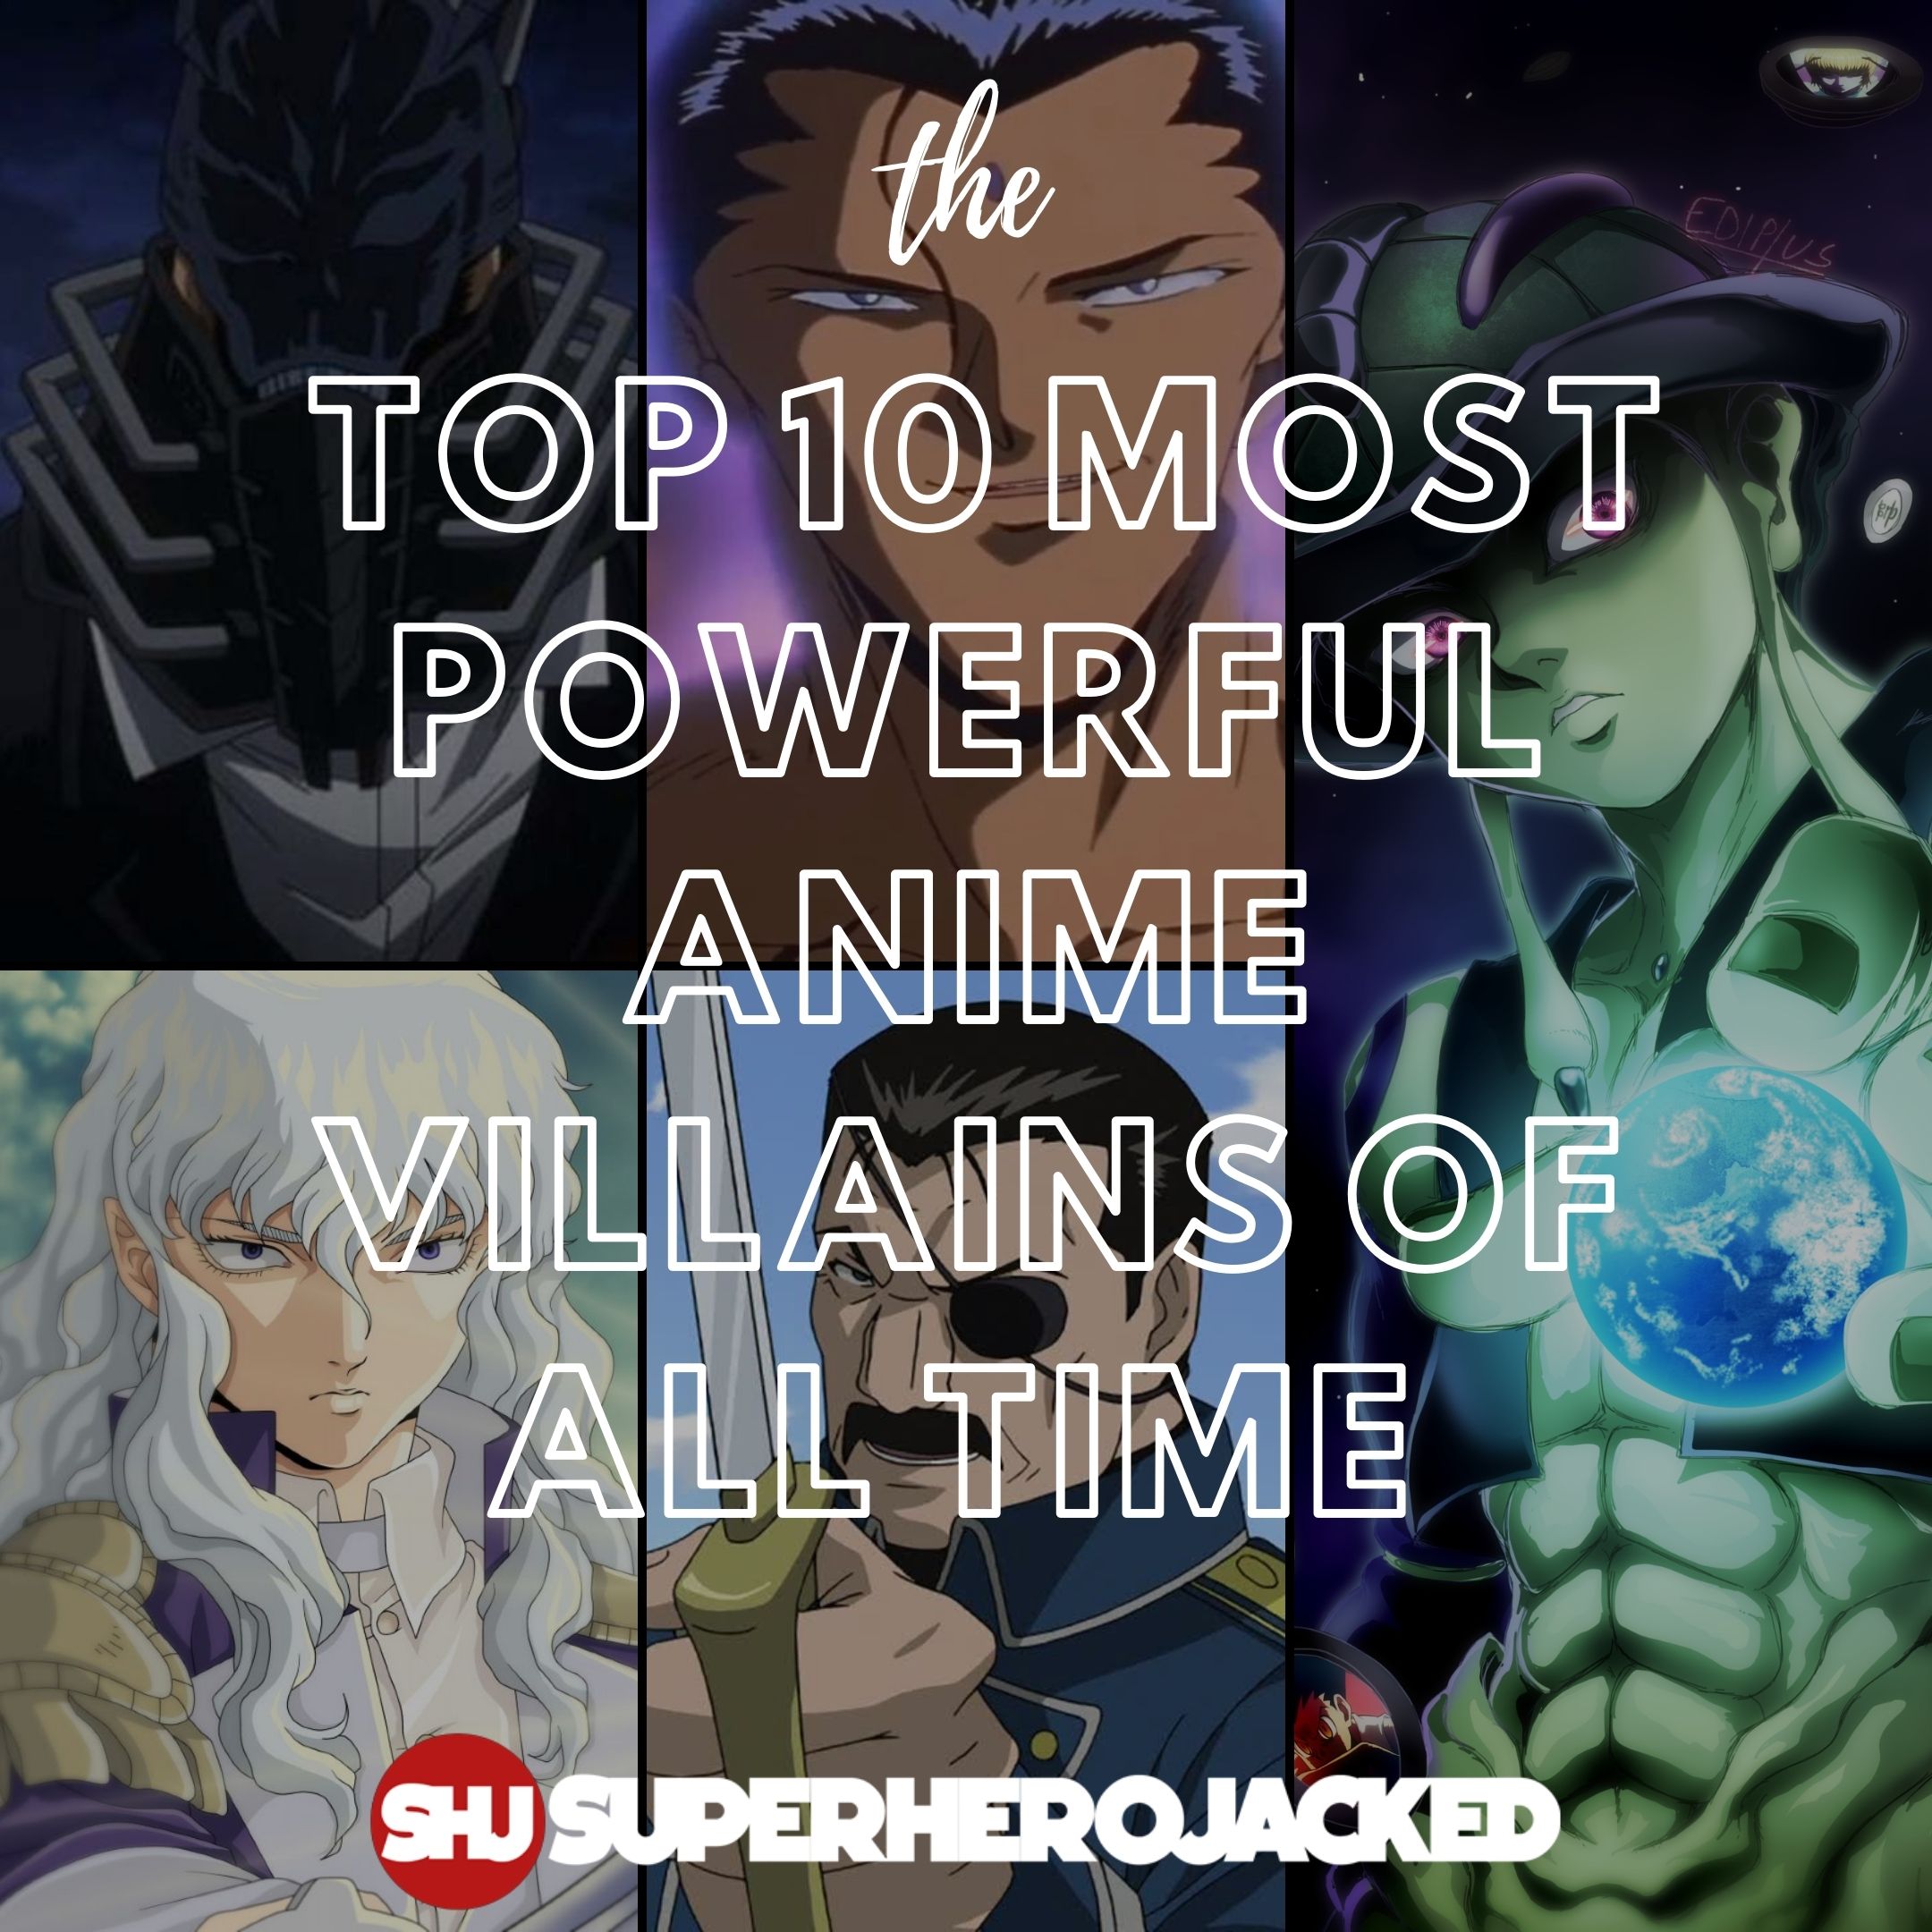 Redemption Arc or Retribution: What is the Best End for Anime Villains?